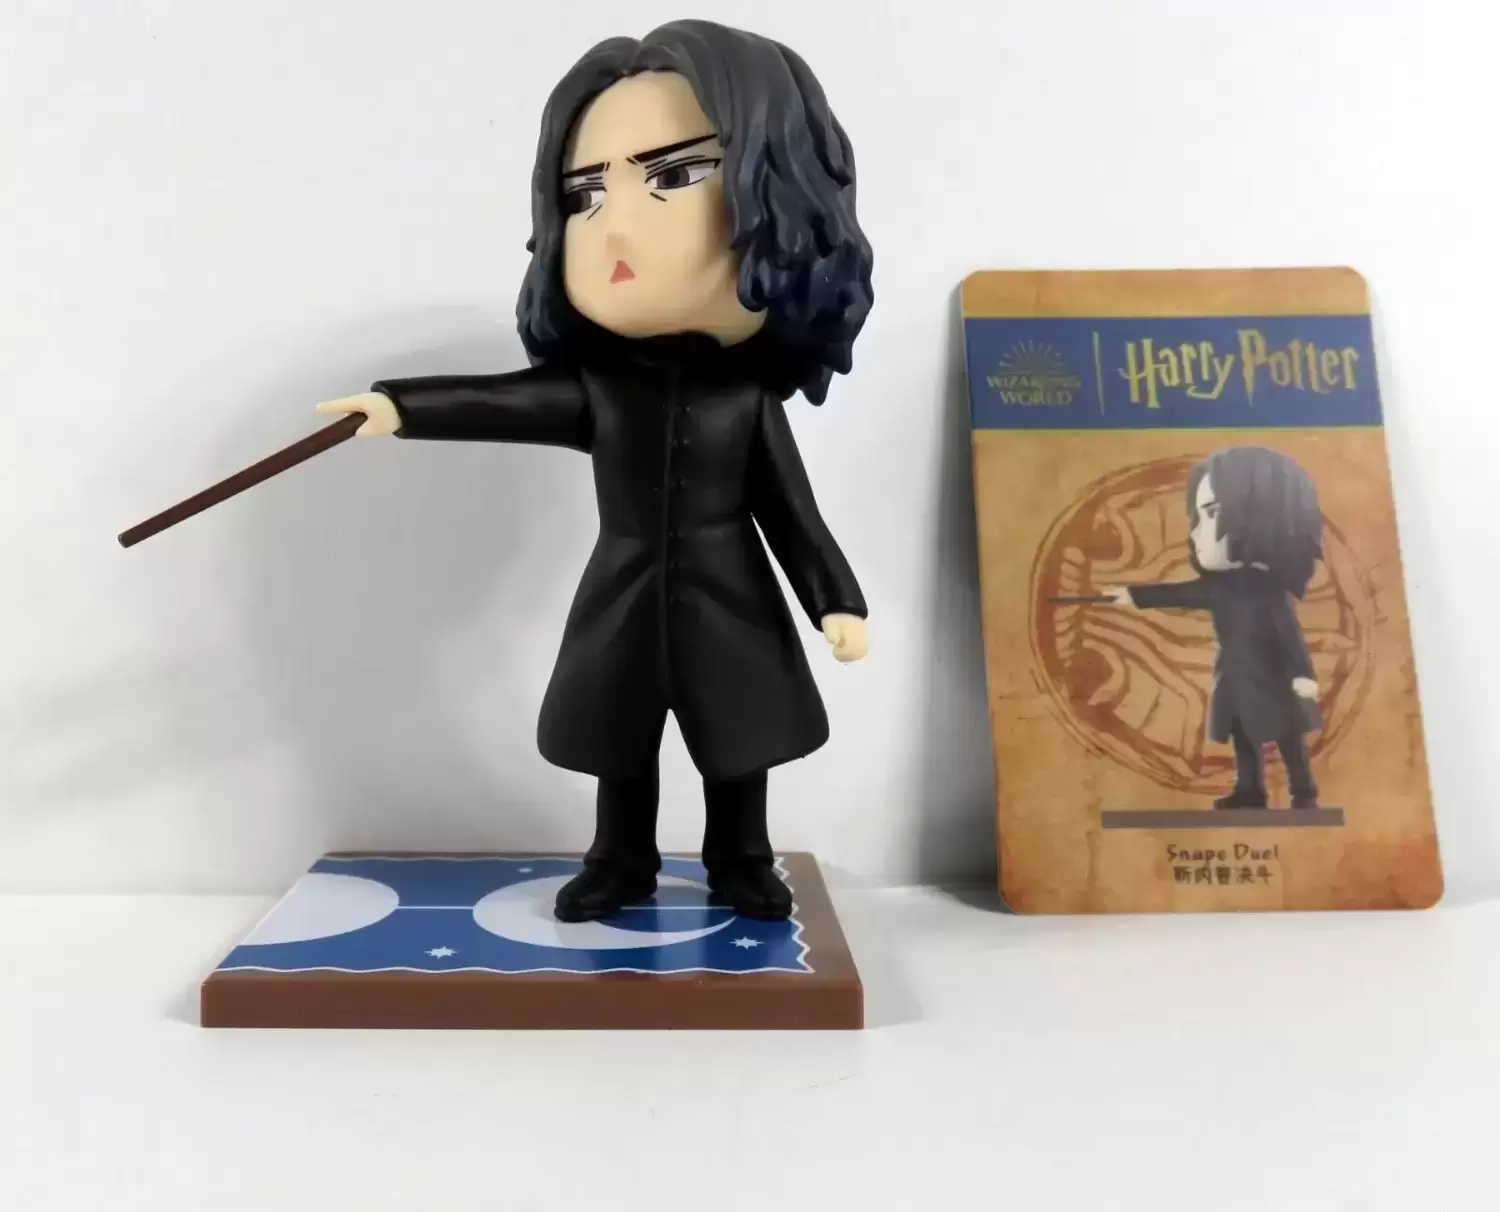 Harry Potter And The Chamber of Secrets - Snape Duel